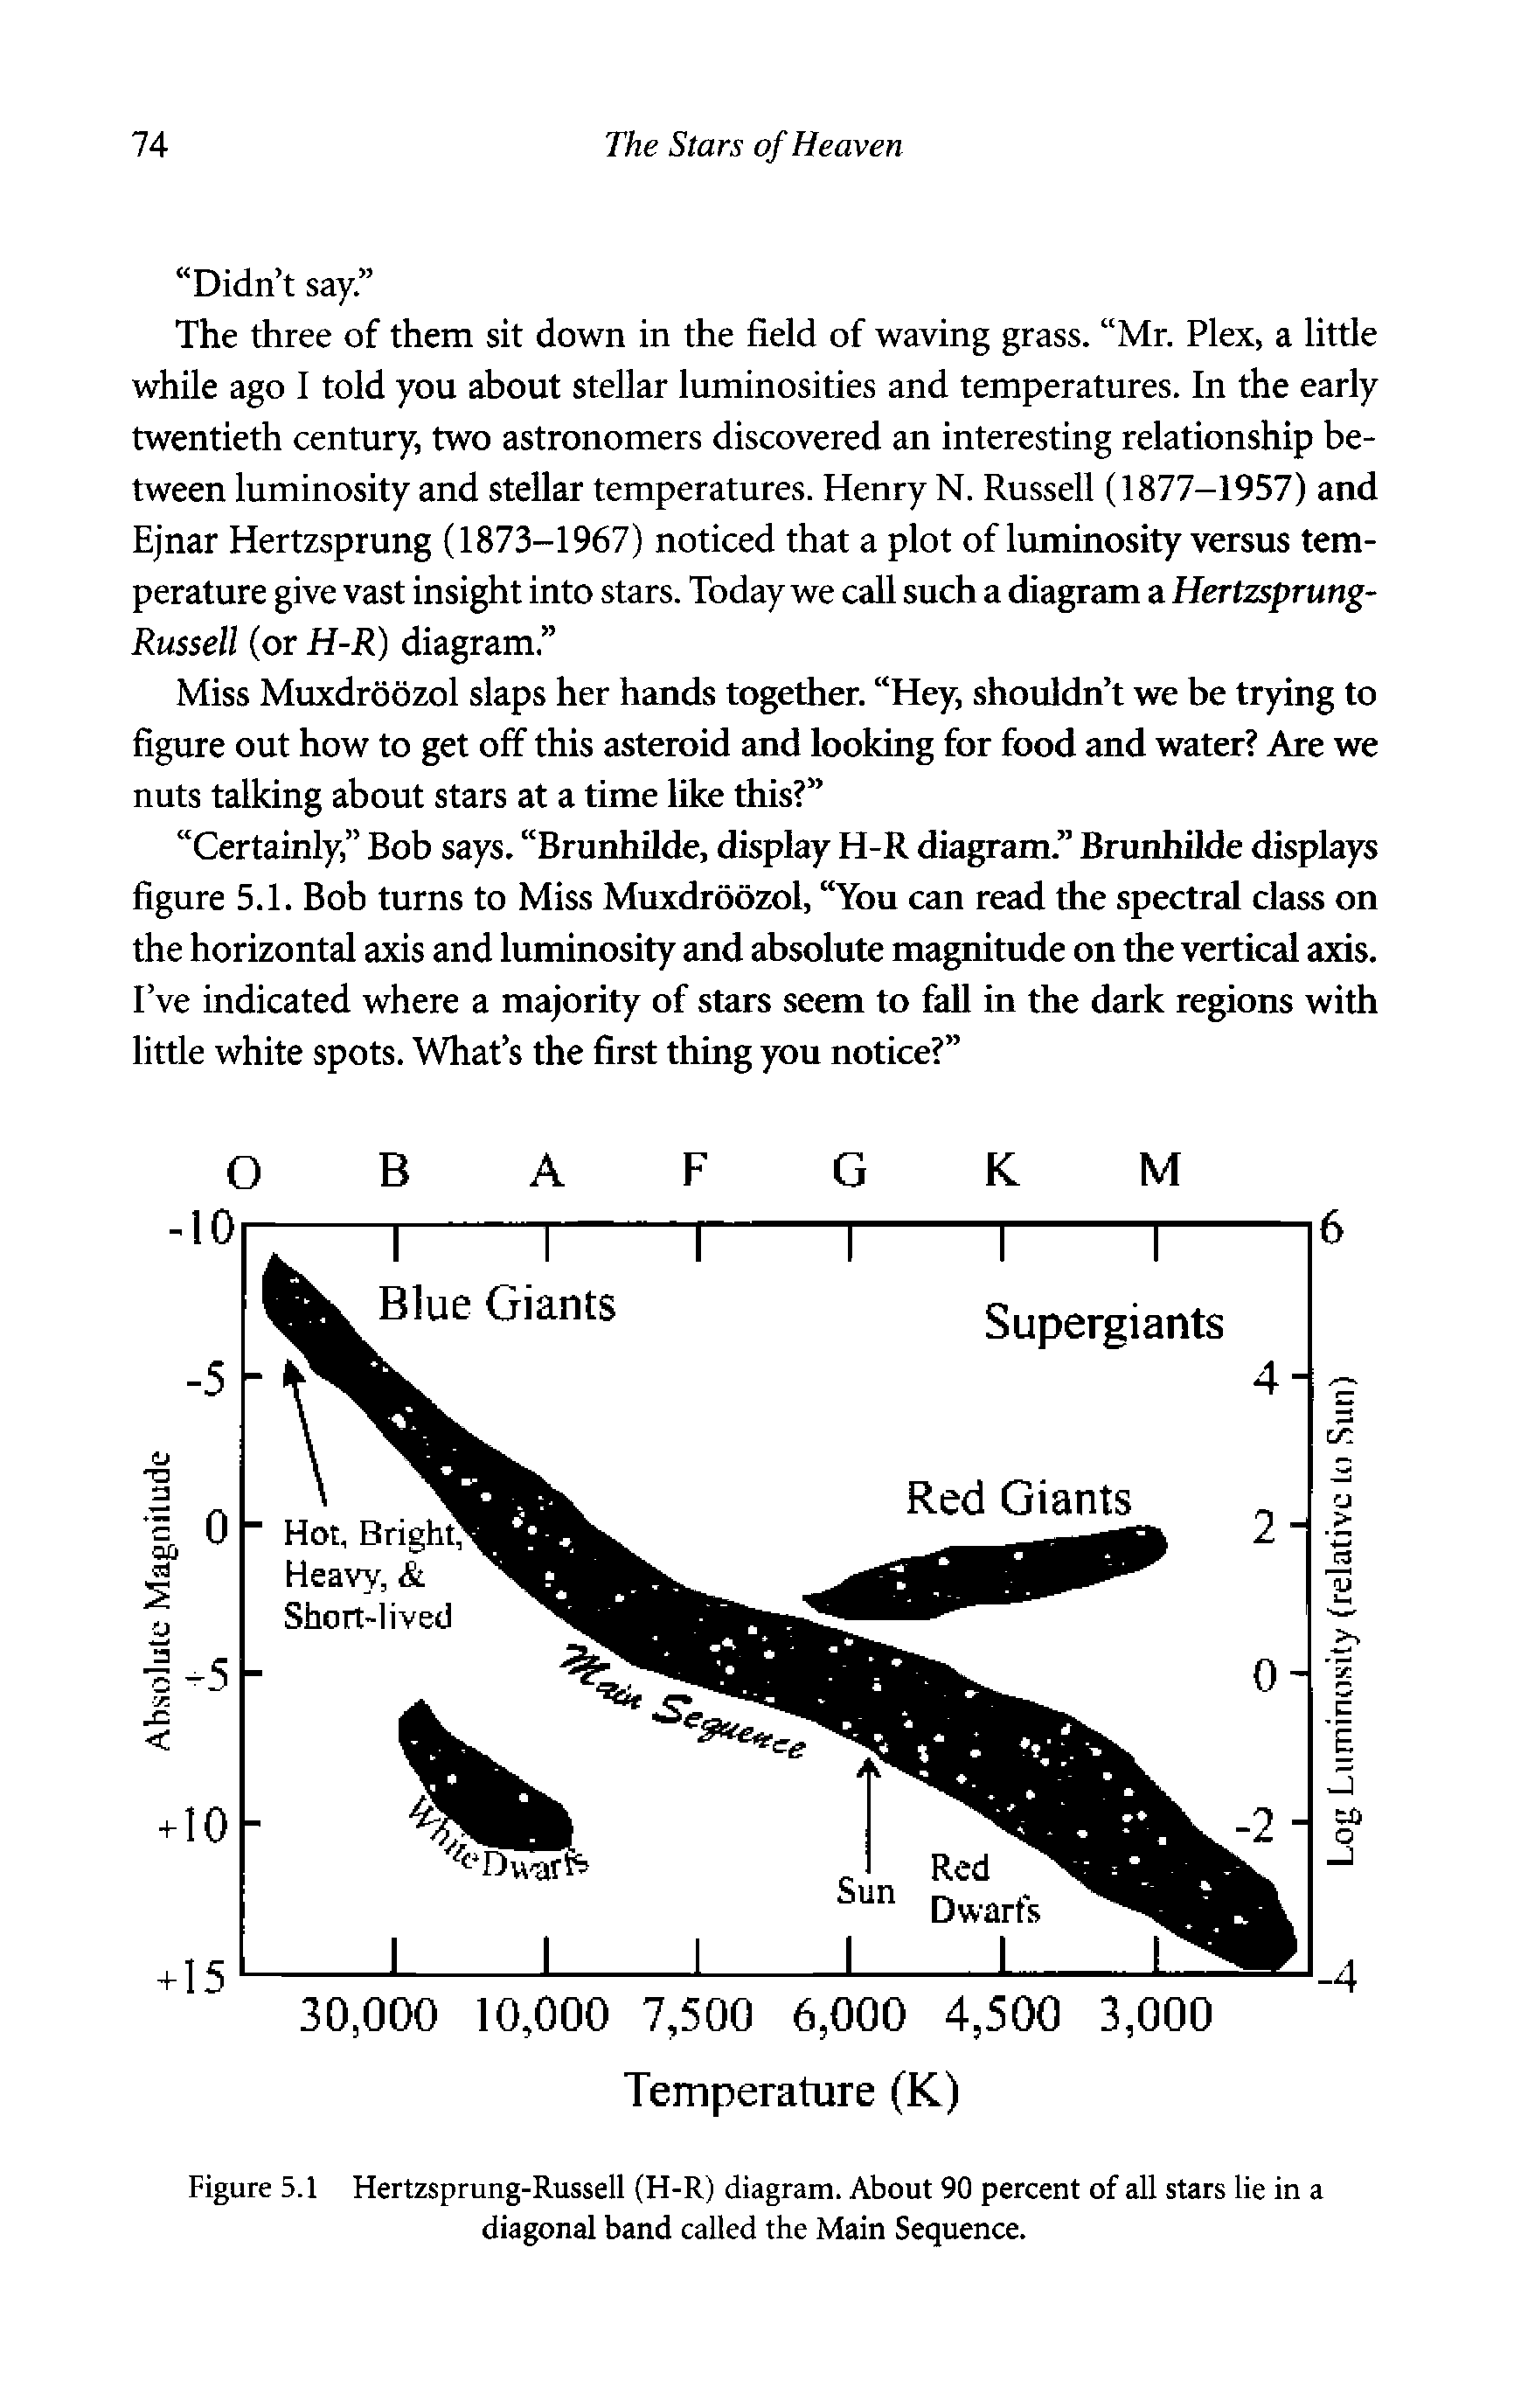 Figure 5.1 Hertzsprung-Russell (H-R) diagram. About 90 percent of all stars lie in a diagonal band called the Main Sequence.